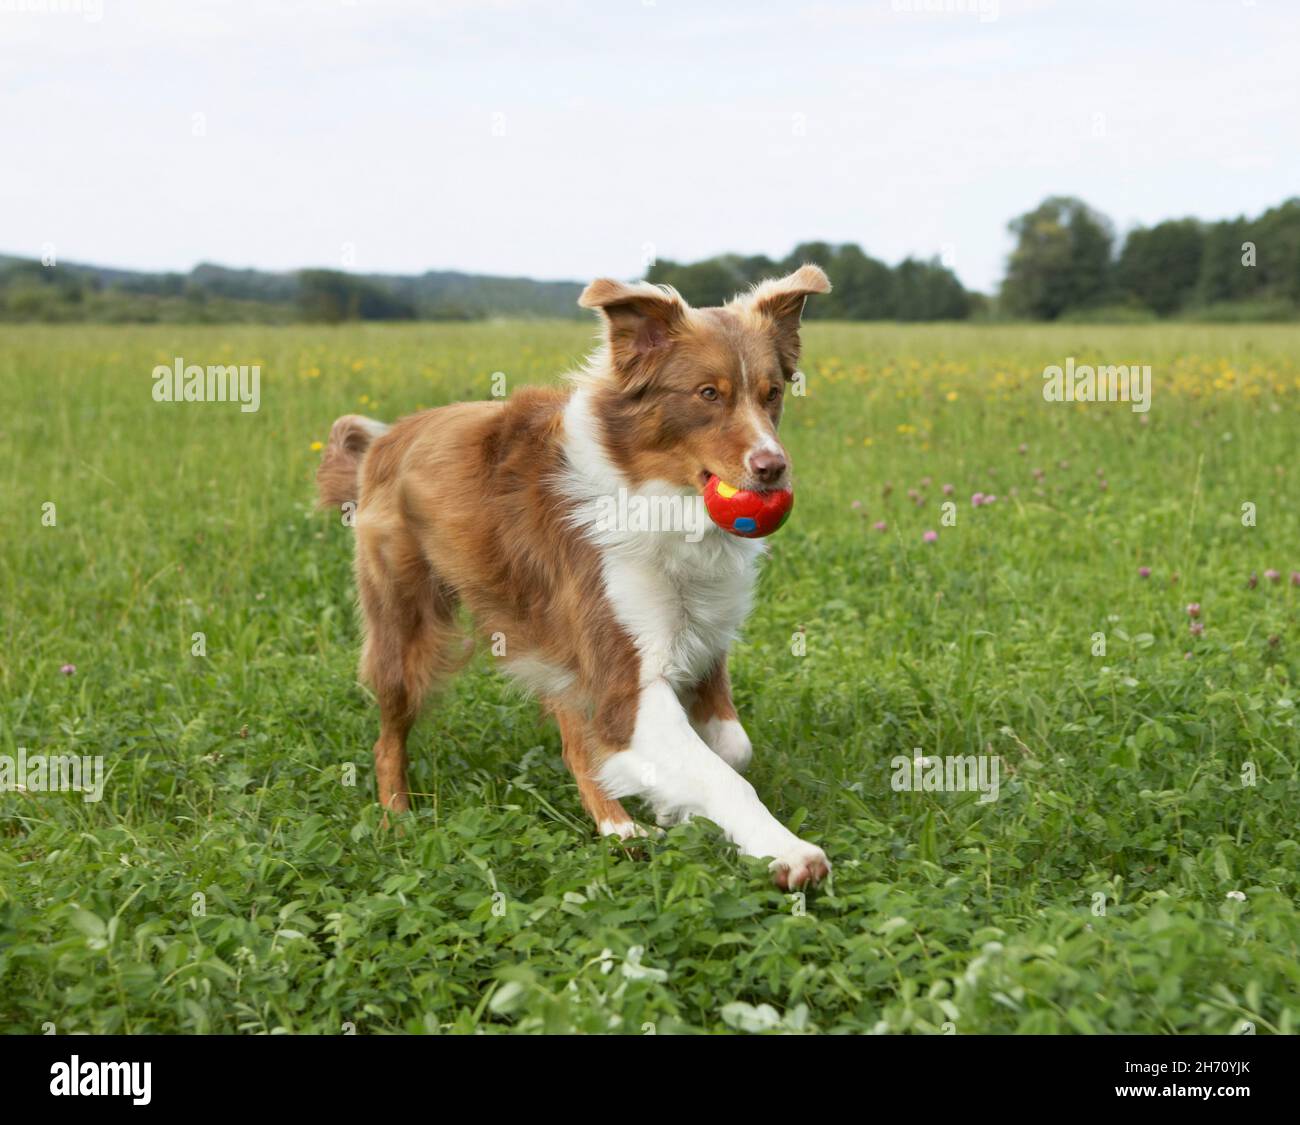 Australian Shepherd. Adult dog running on a meadow, carrying a ball. Germany Stock Photo